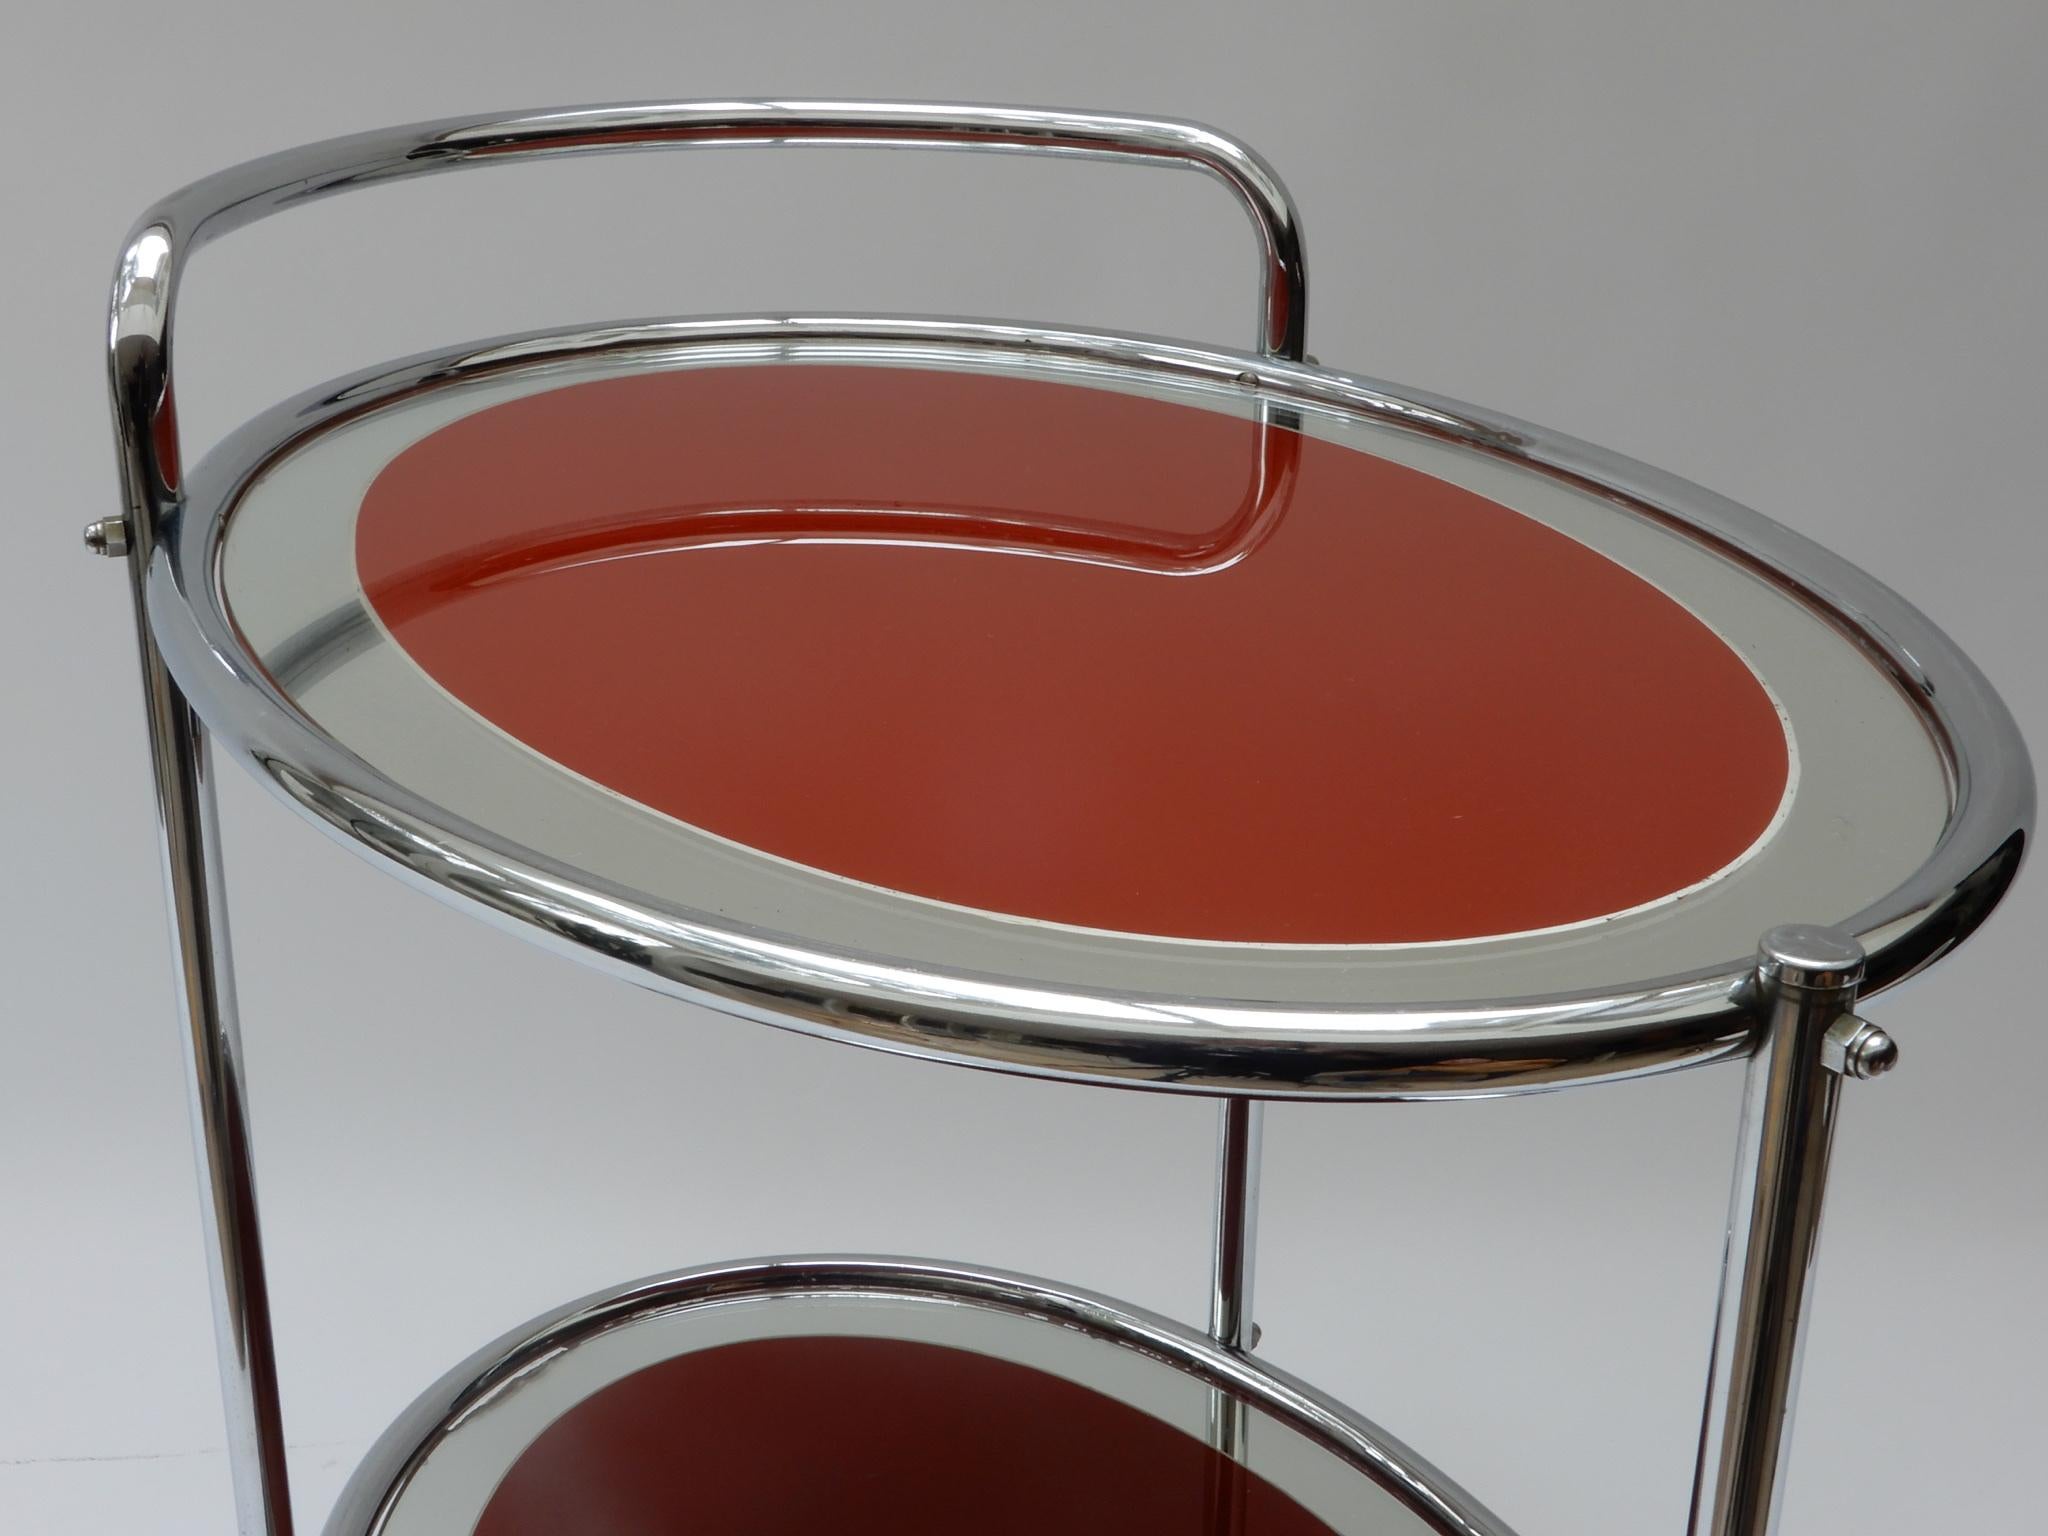 Oval Chrome and Rust Glass Mirrored Bar Cart, 1950s For Sale 2